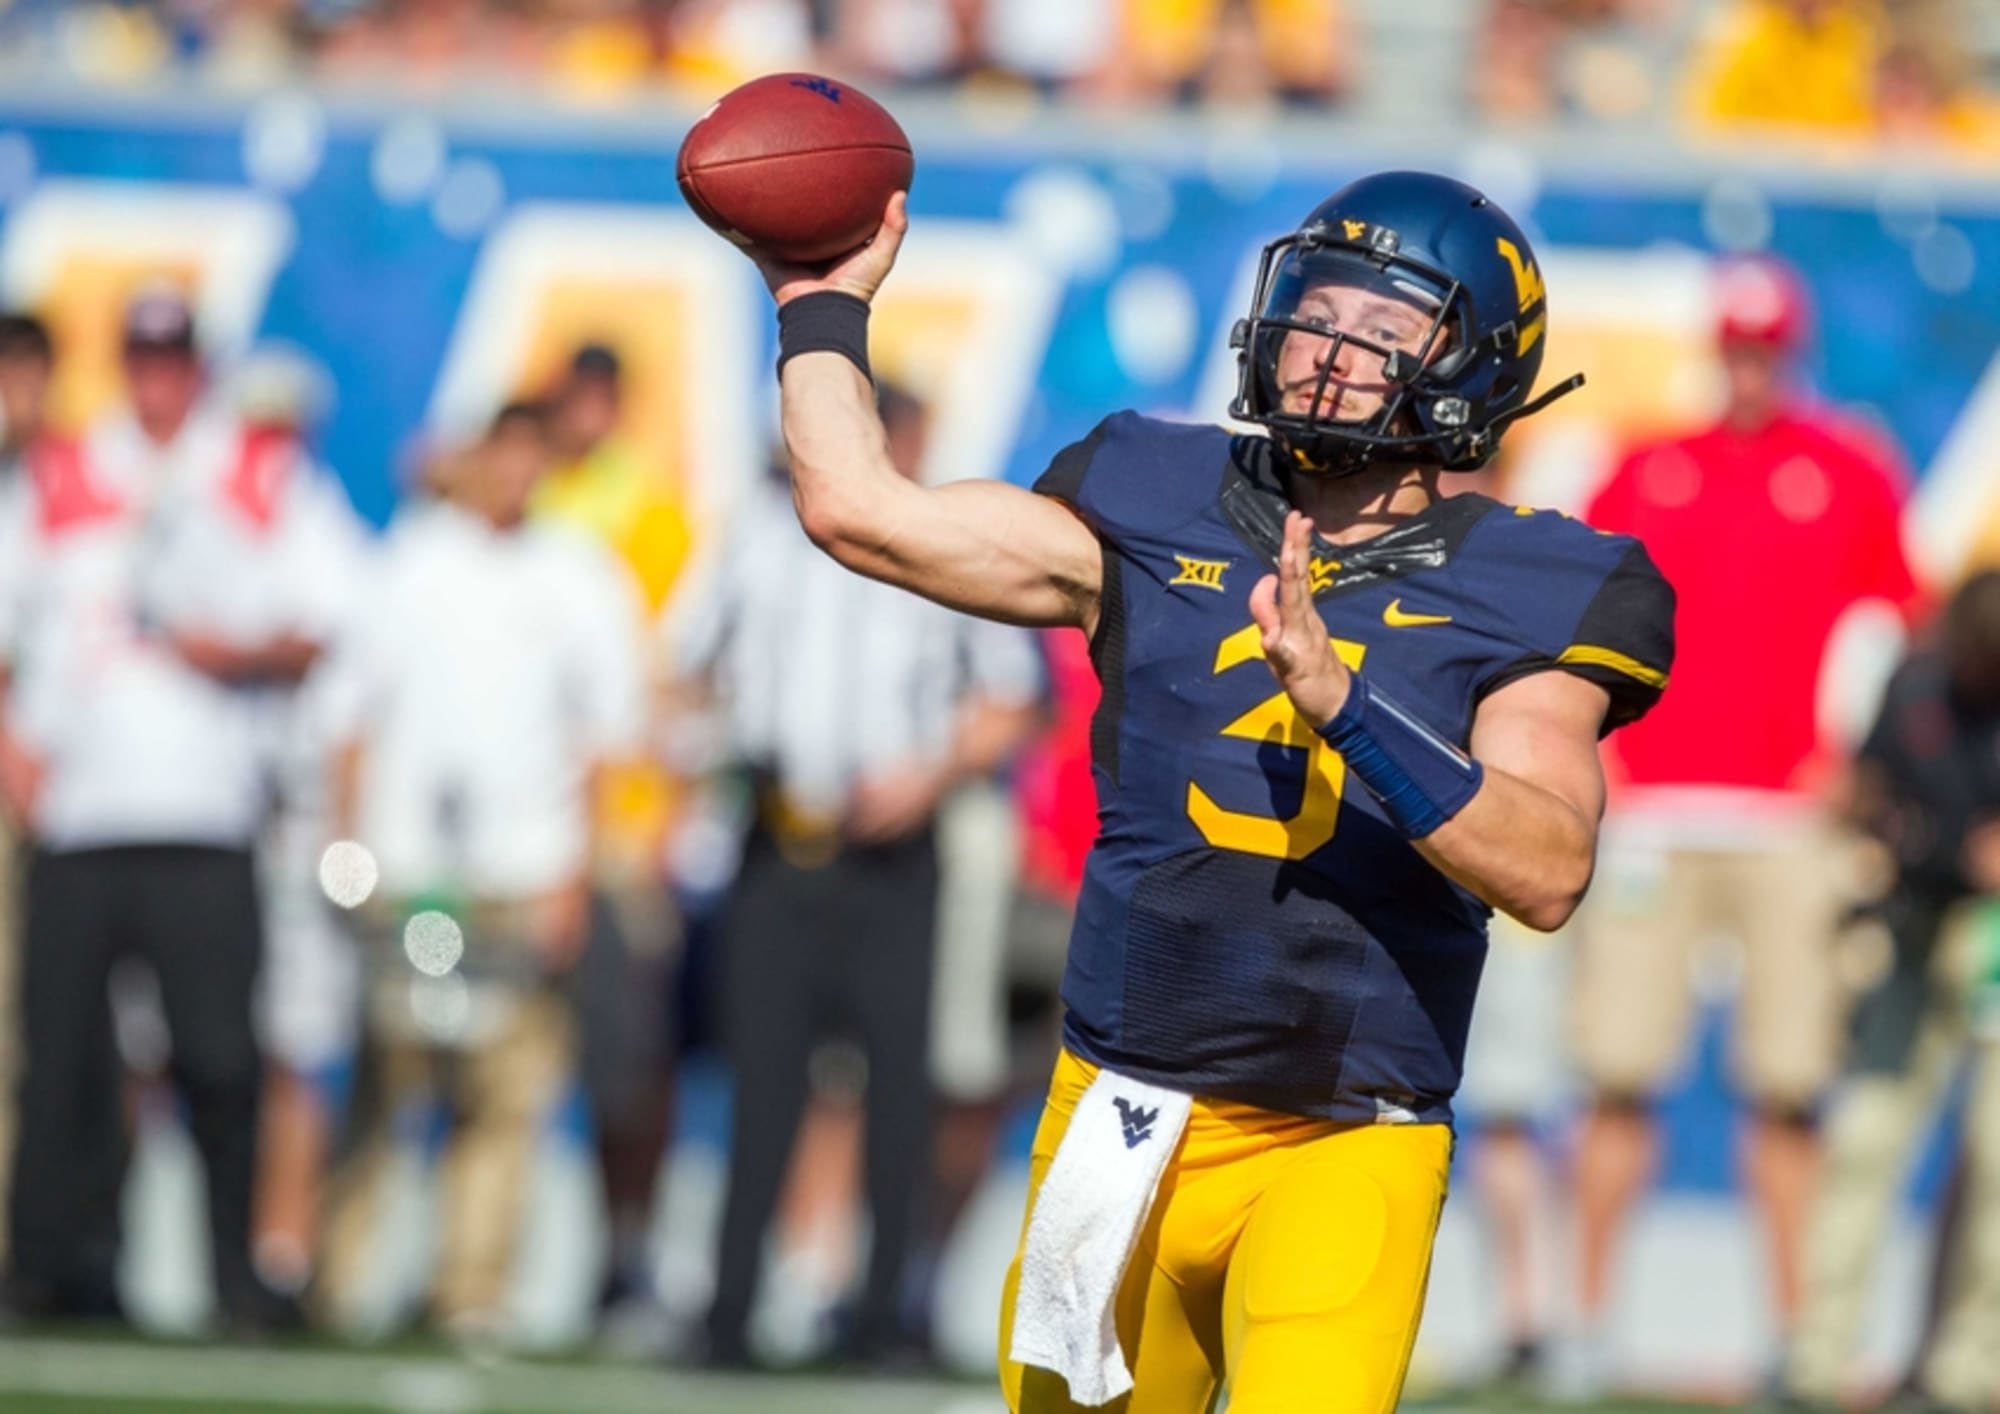 West Virginia vs BYU live stream Watch Mountaineers vs Cougars online